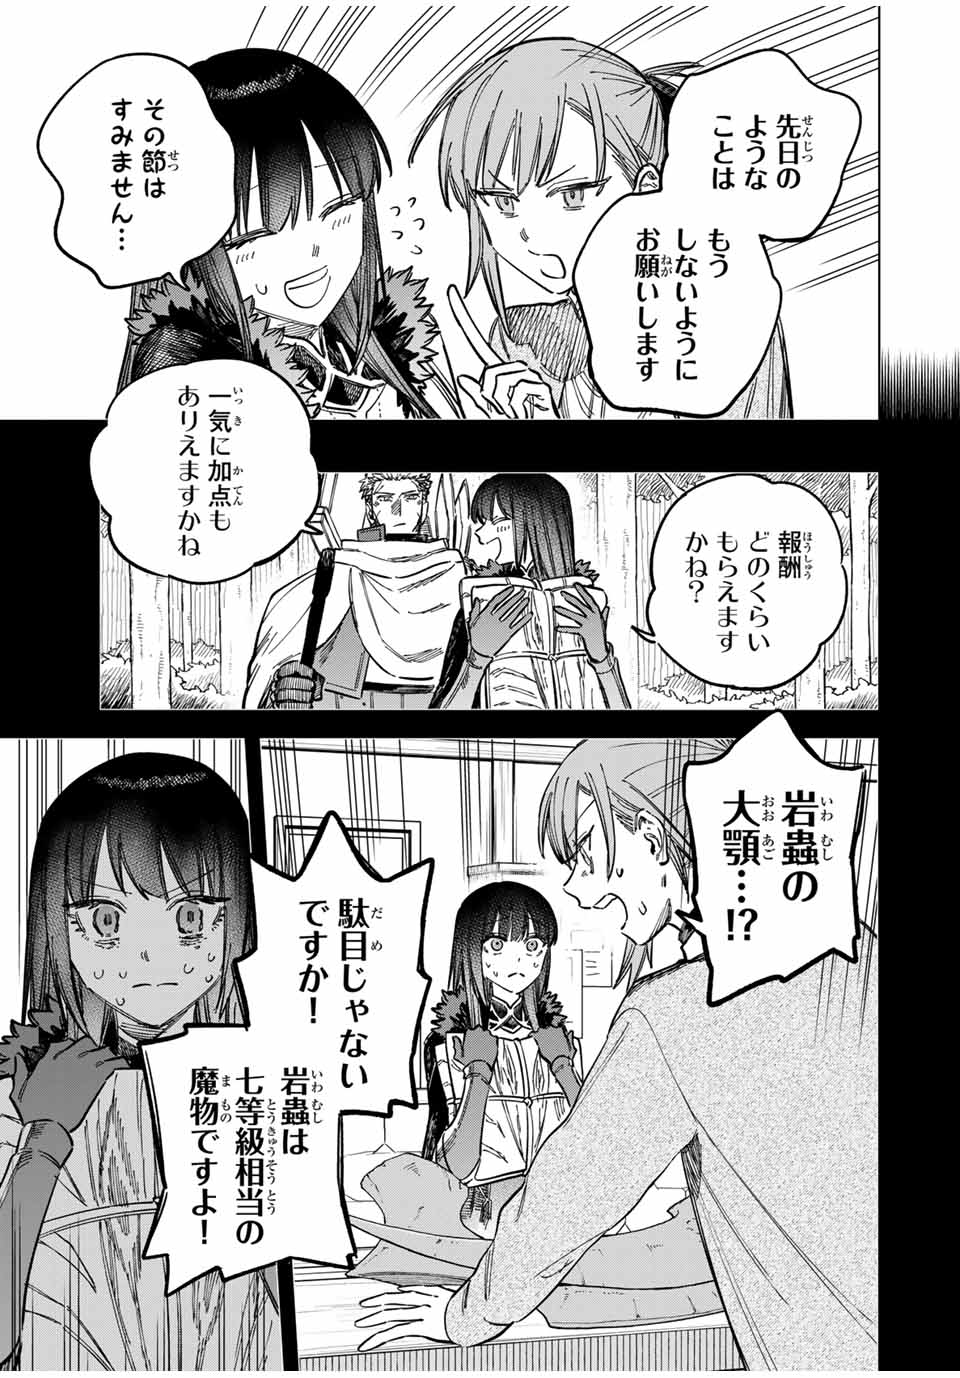 Witch and Mercenary 魔女と傭兵 第10話 - Page 5